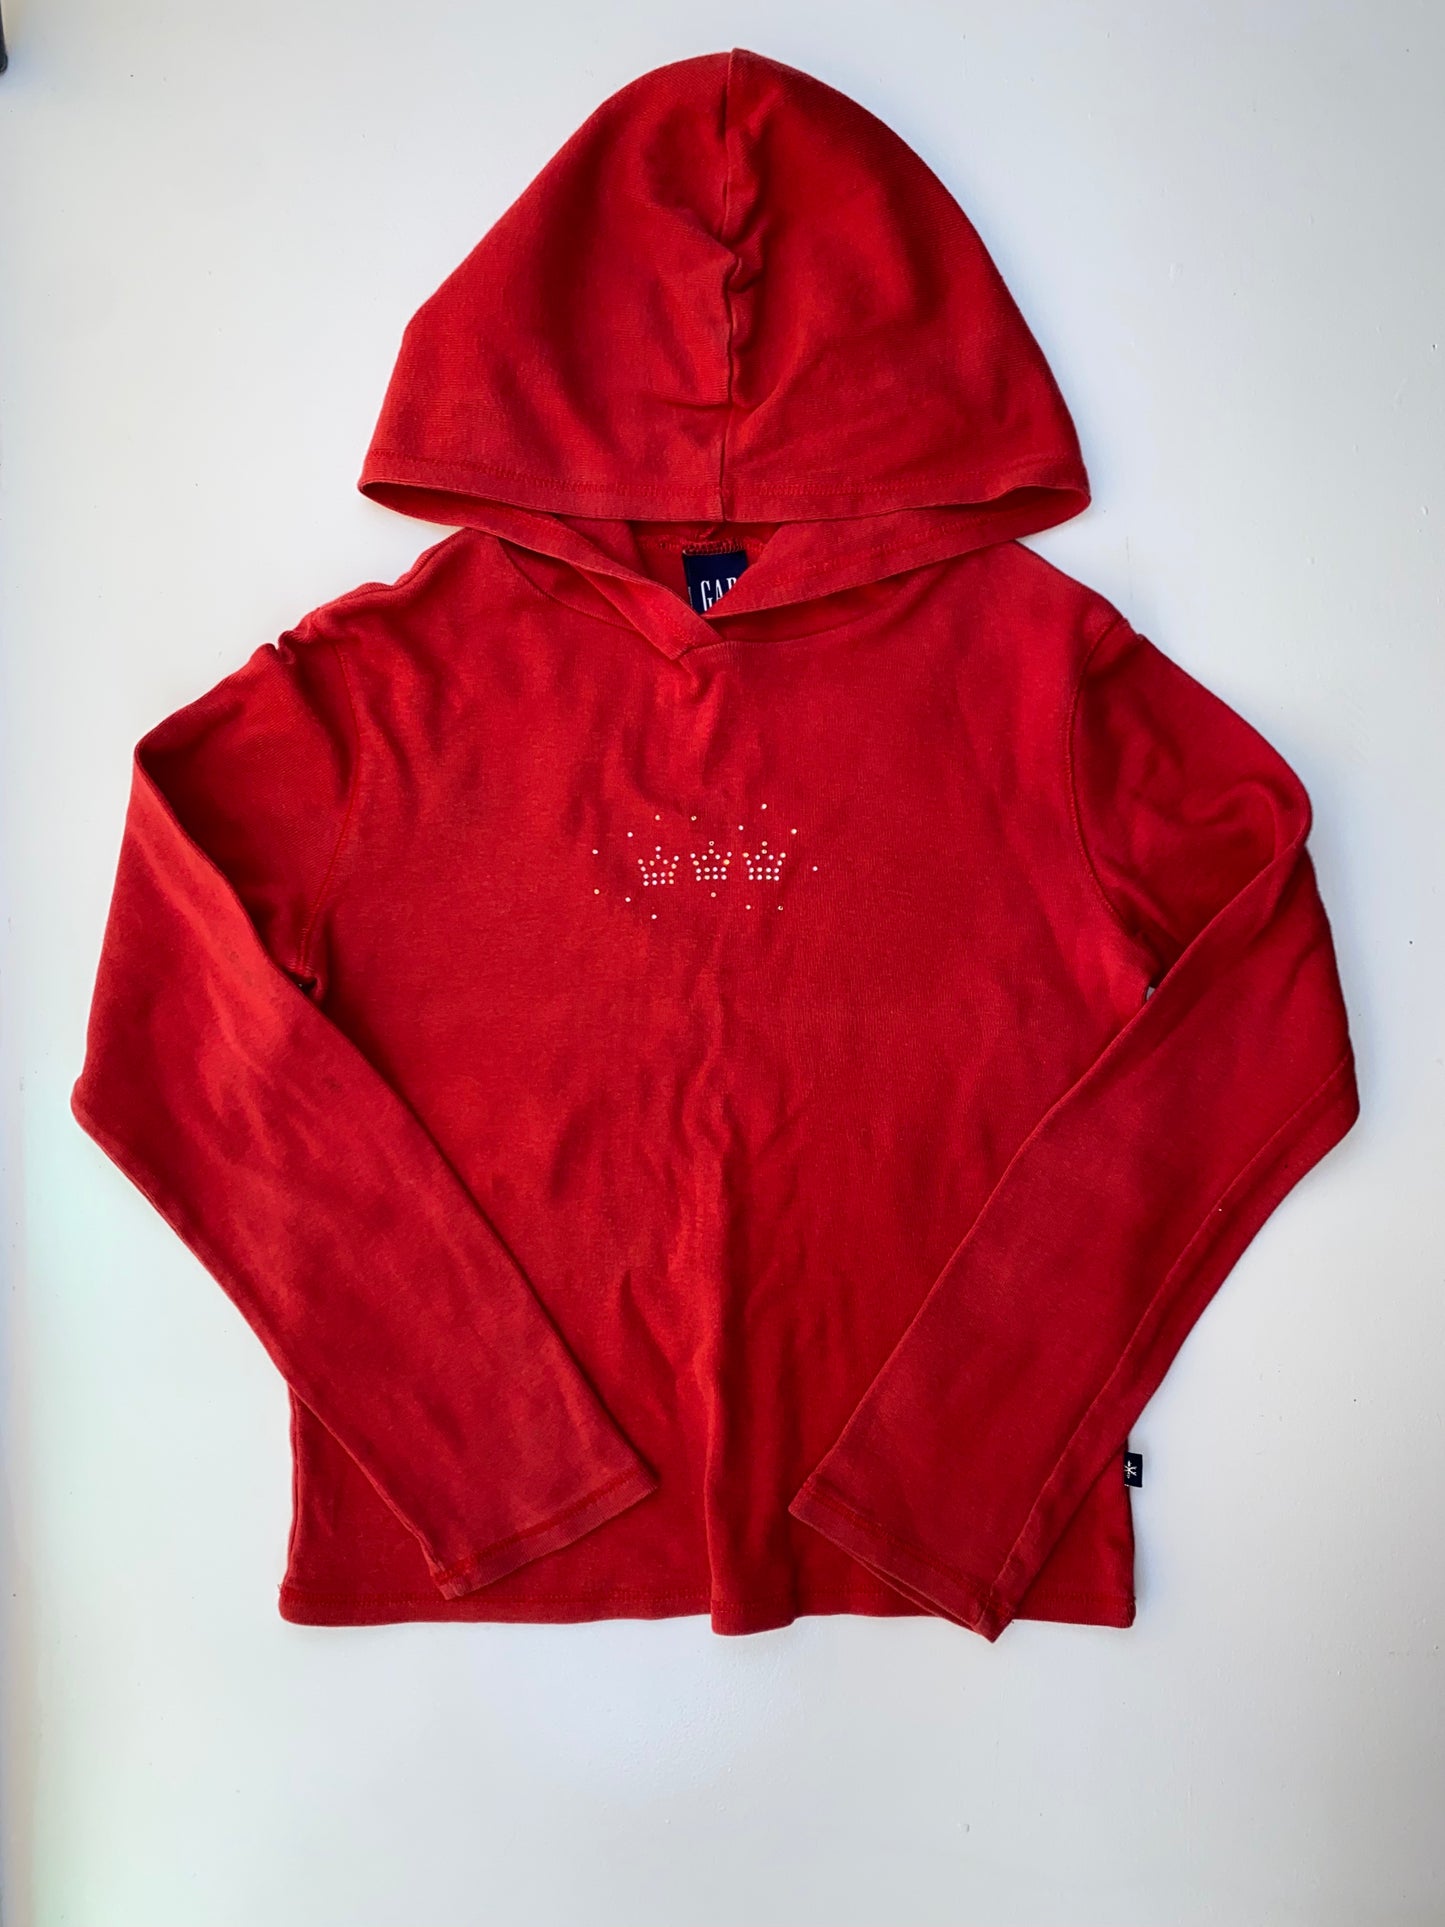 Gap Red Hooded Long Sleeve Shirt with Crowns 10